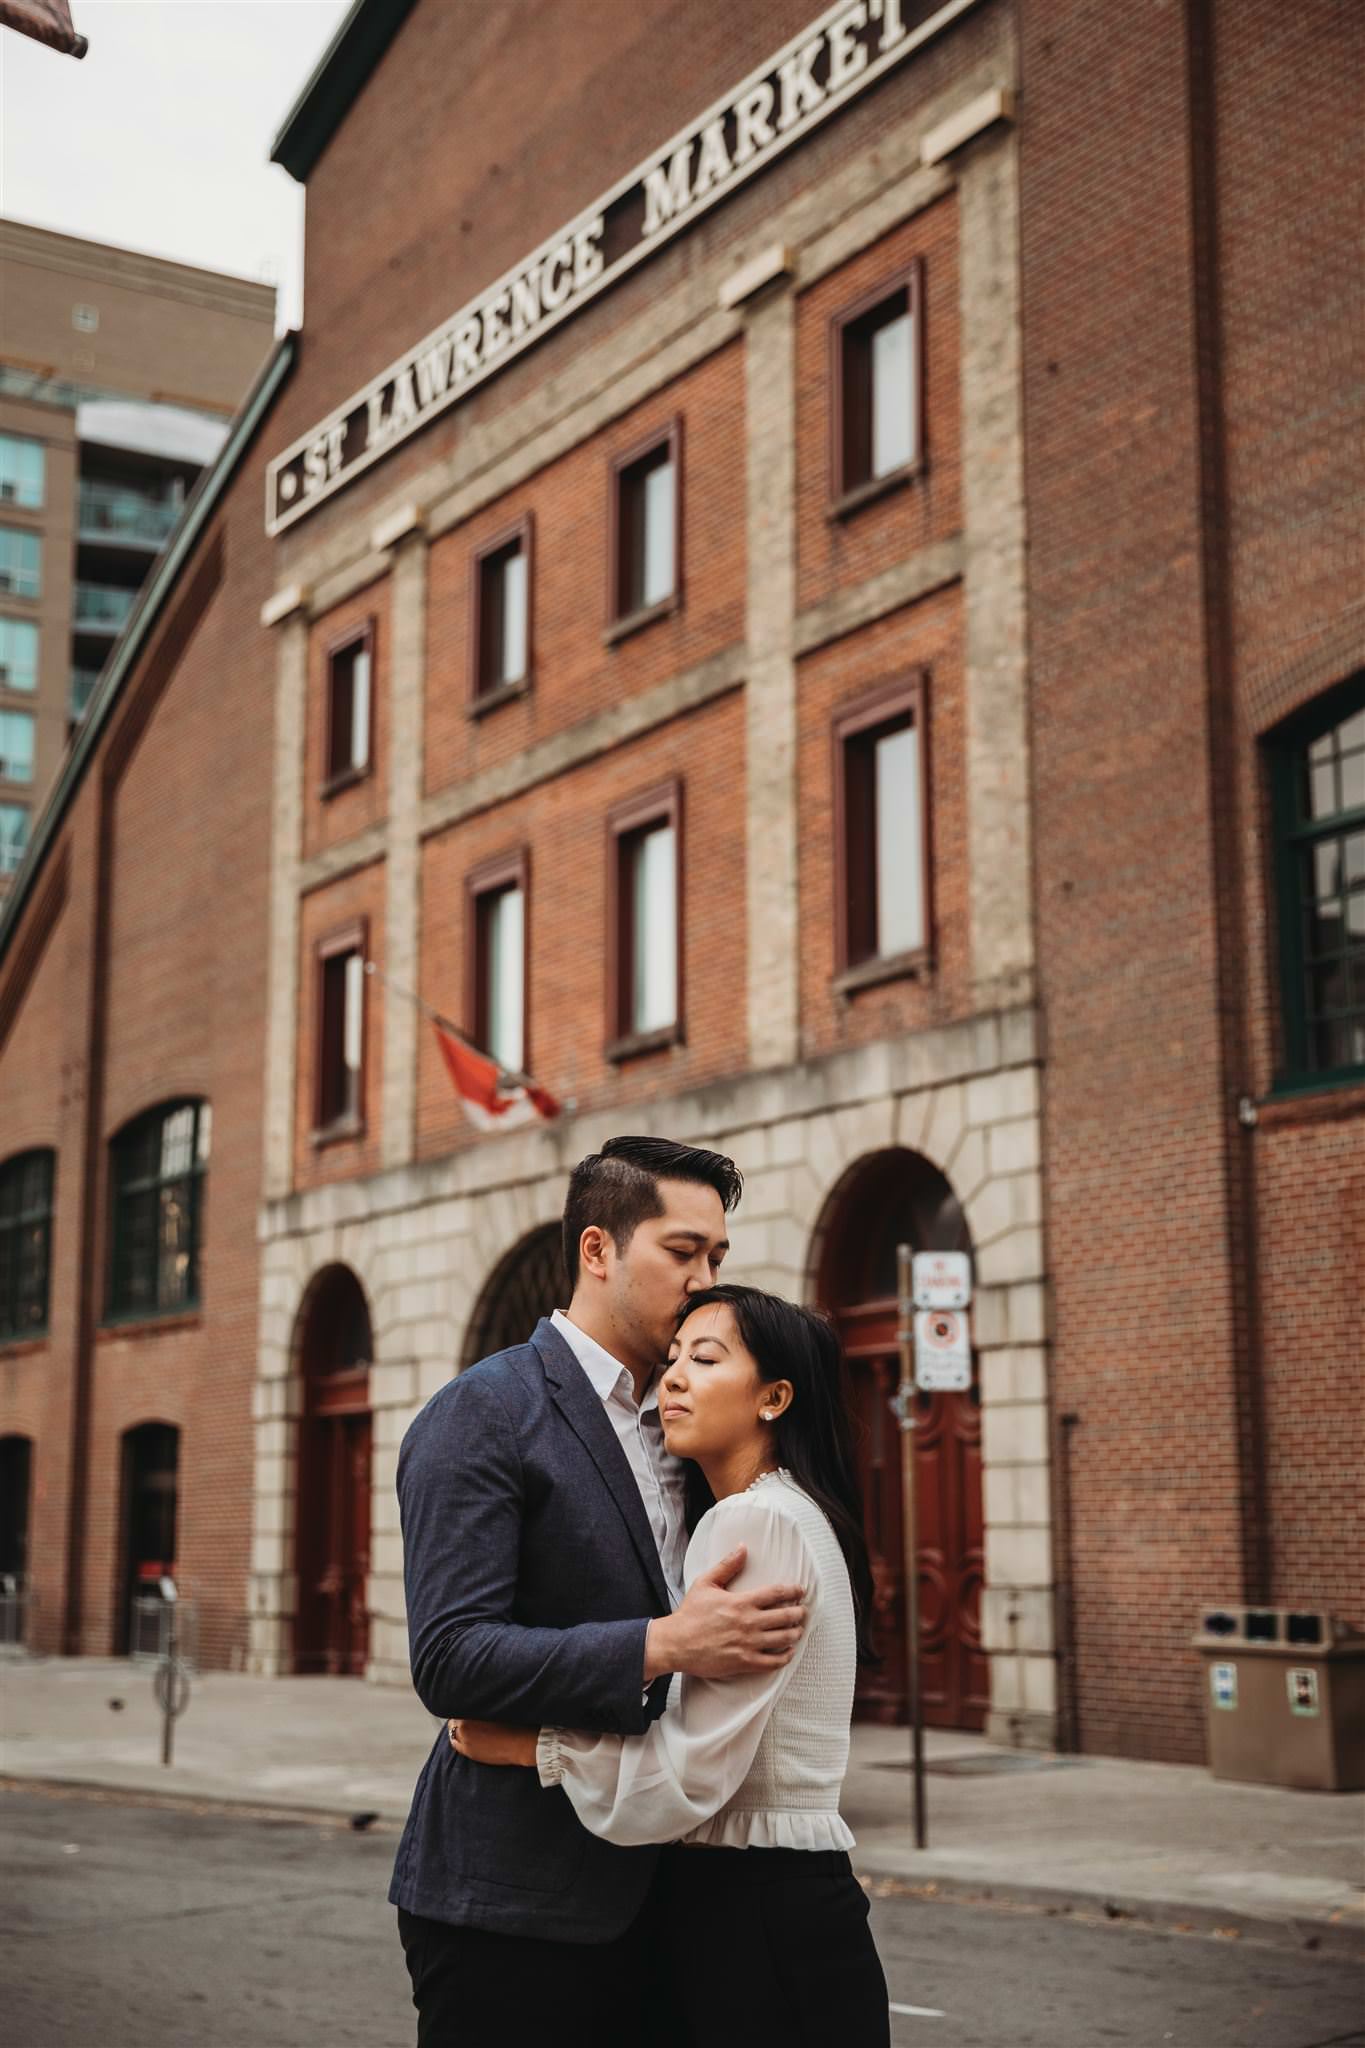 photography locations in toronto, st lawrence market wedding photos, st lawrence market engagement photos